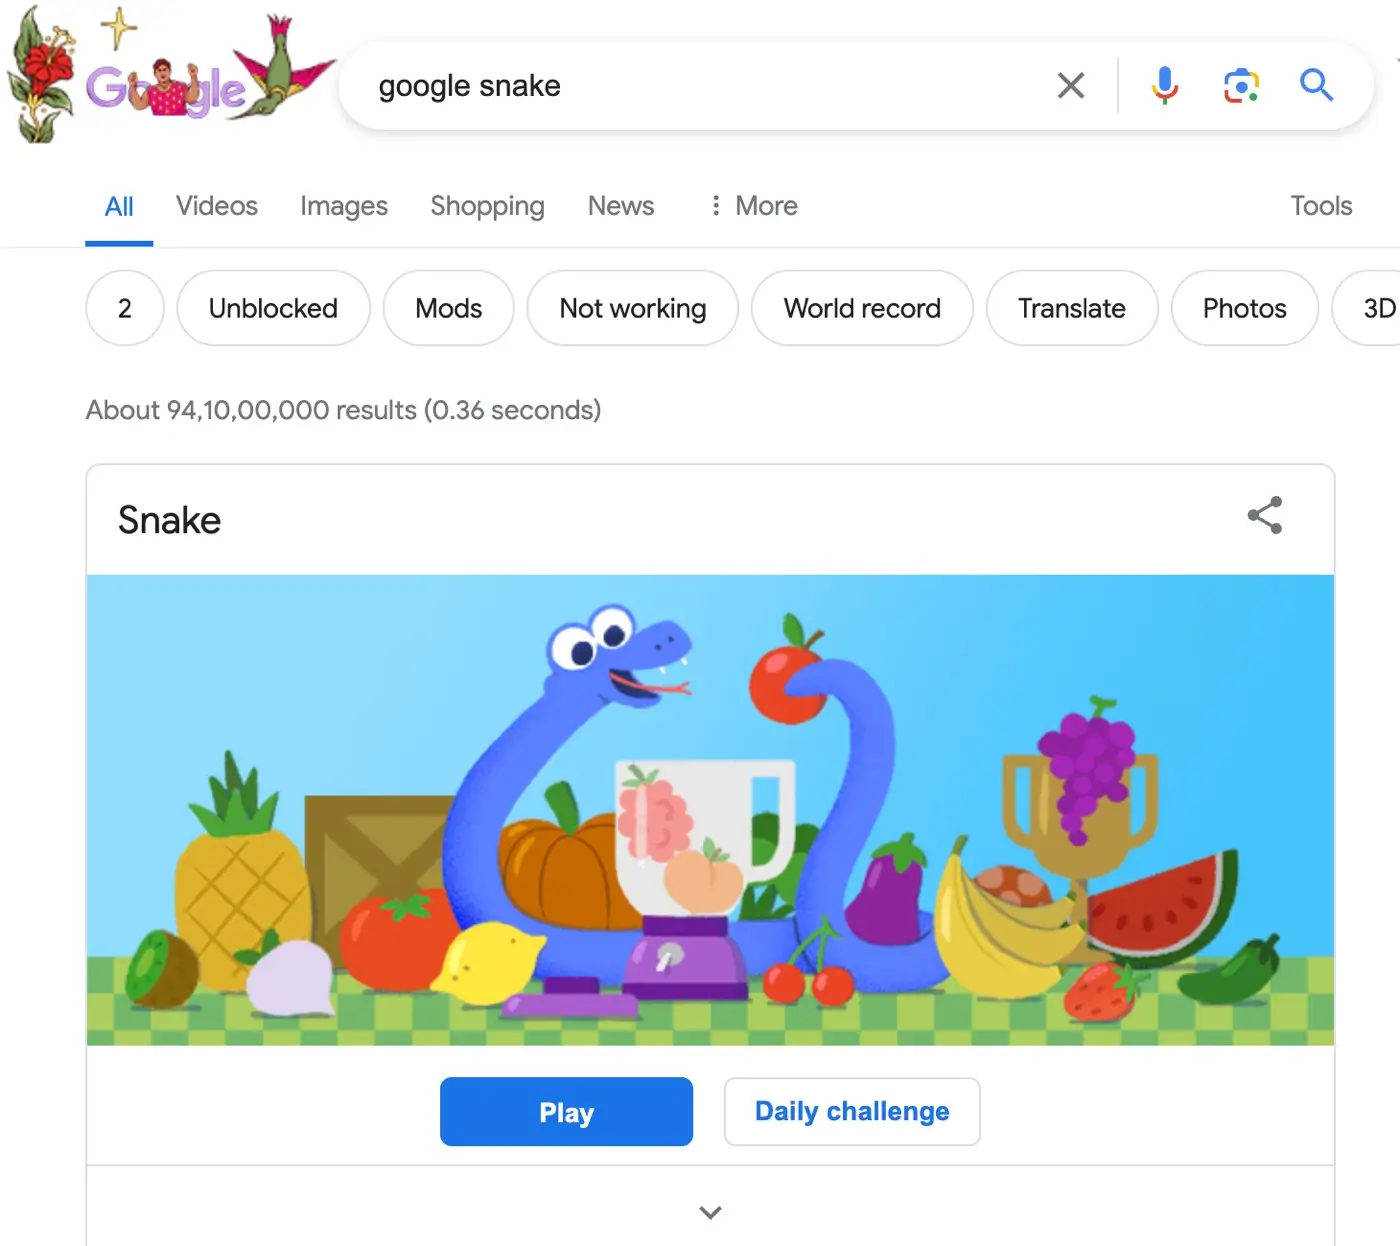 Search for Google snake game